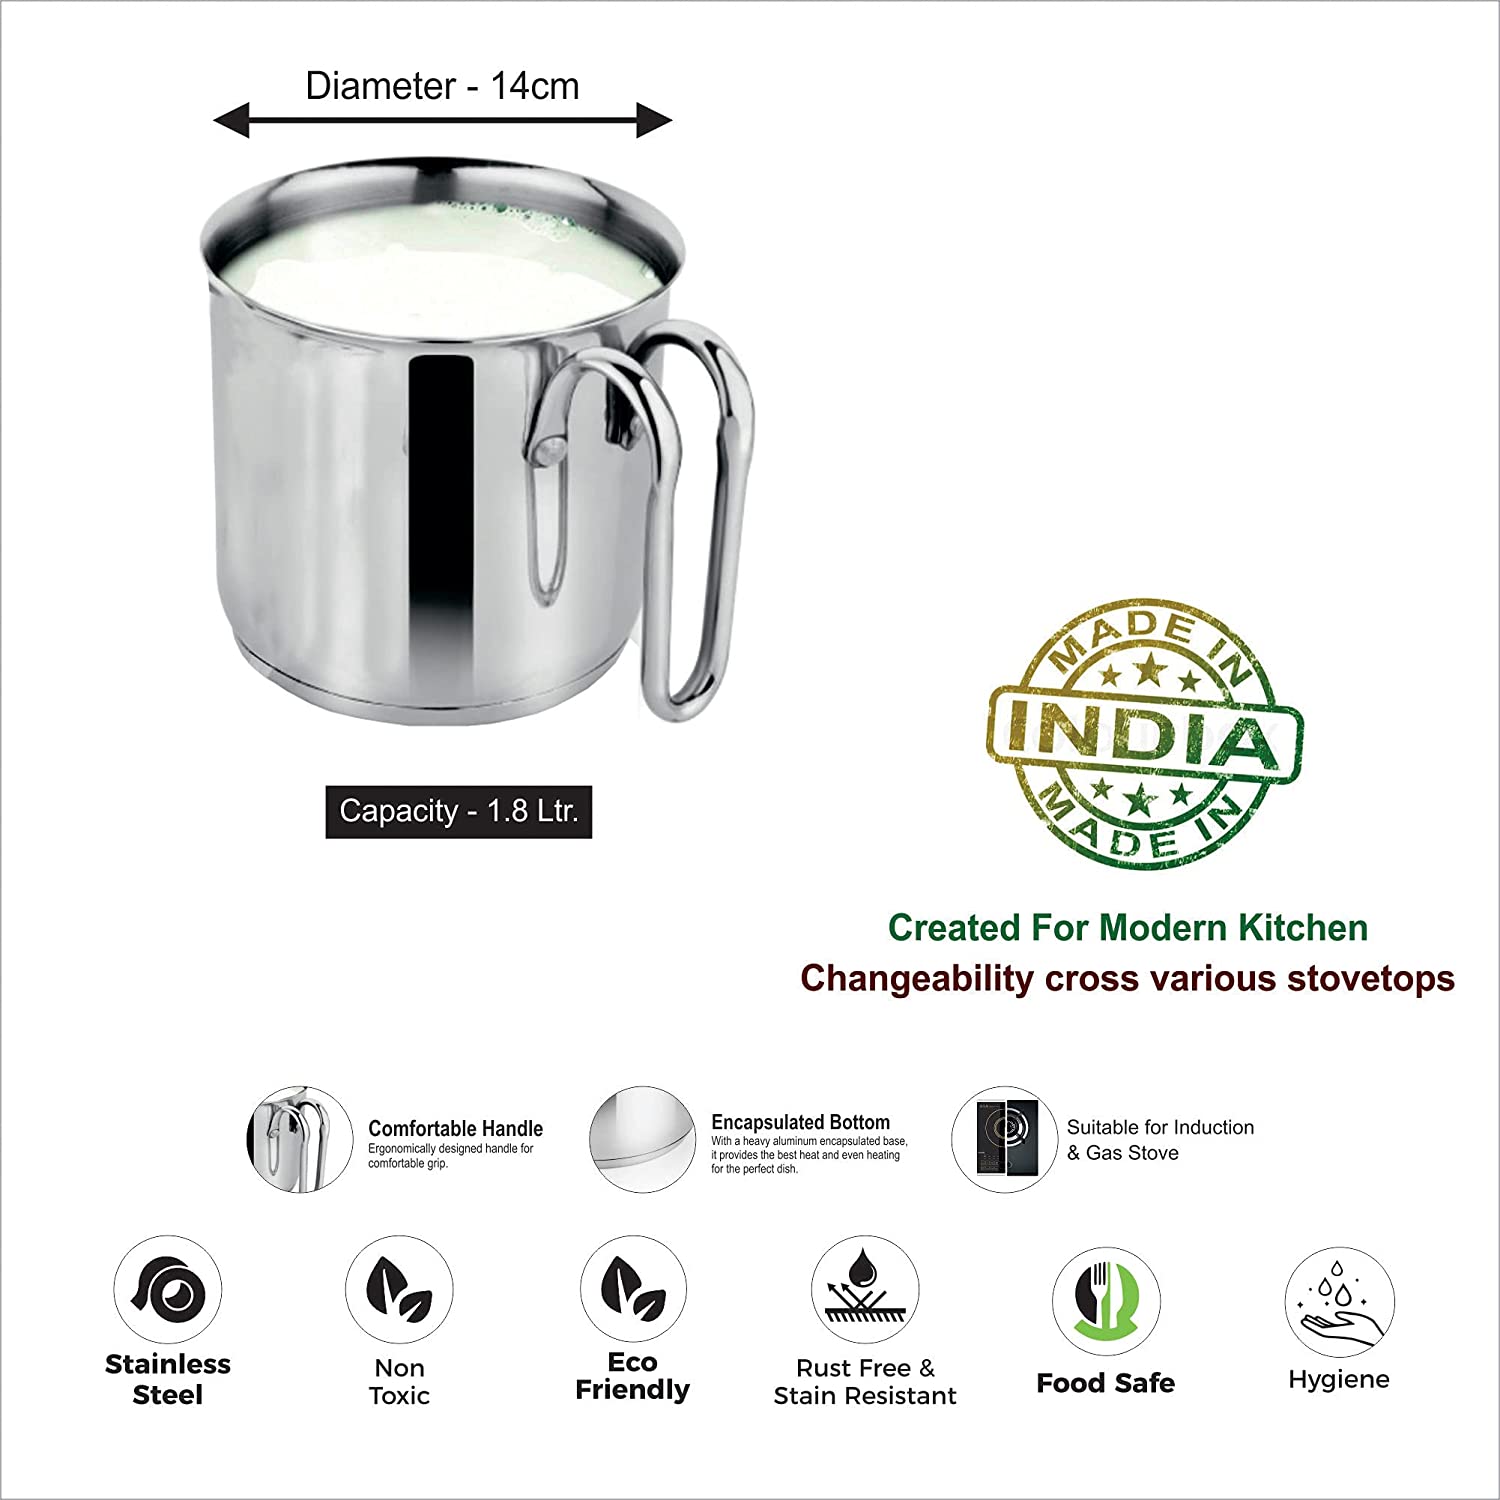 Prabha Encapsulated Base Stainless Steel Milk Pot Milk Boiler 1.8L And 14cm With Lid